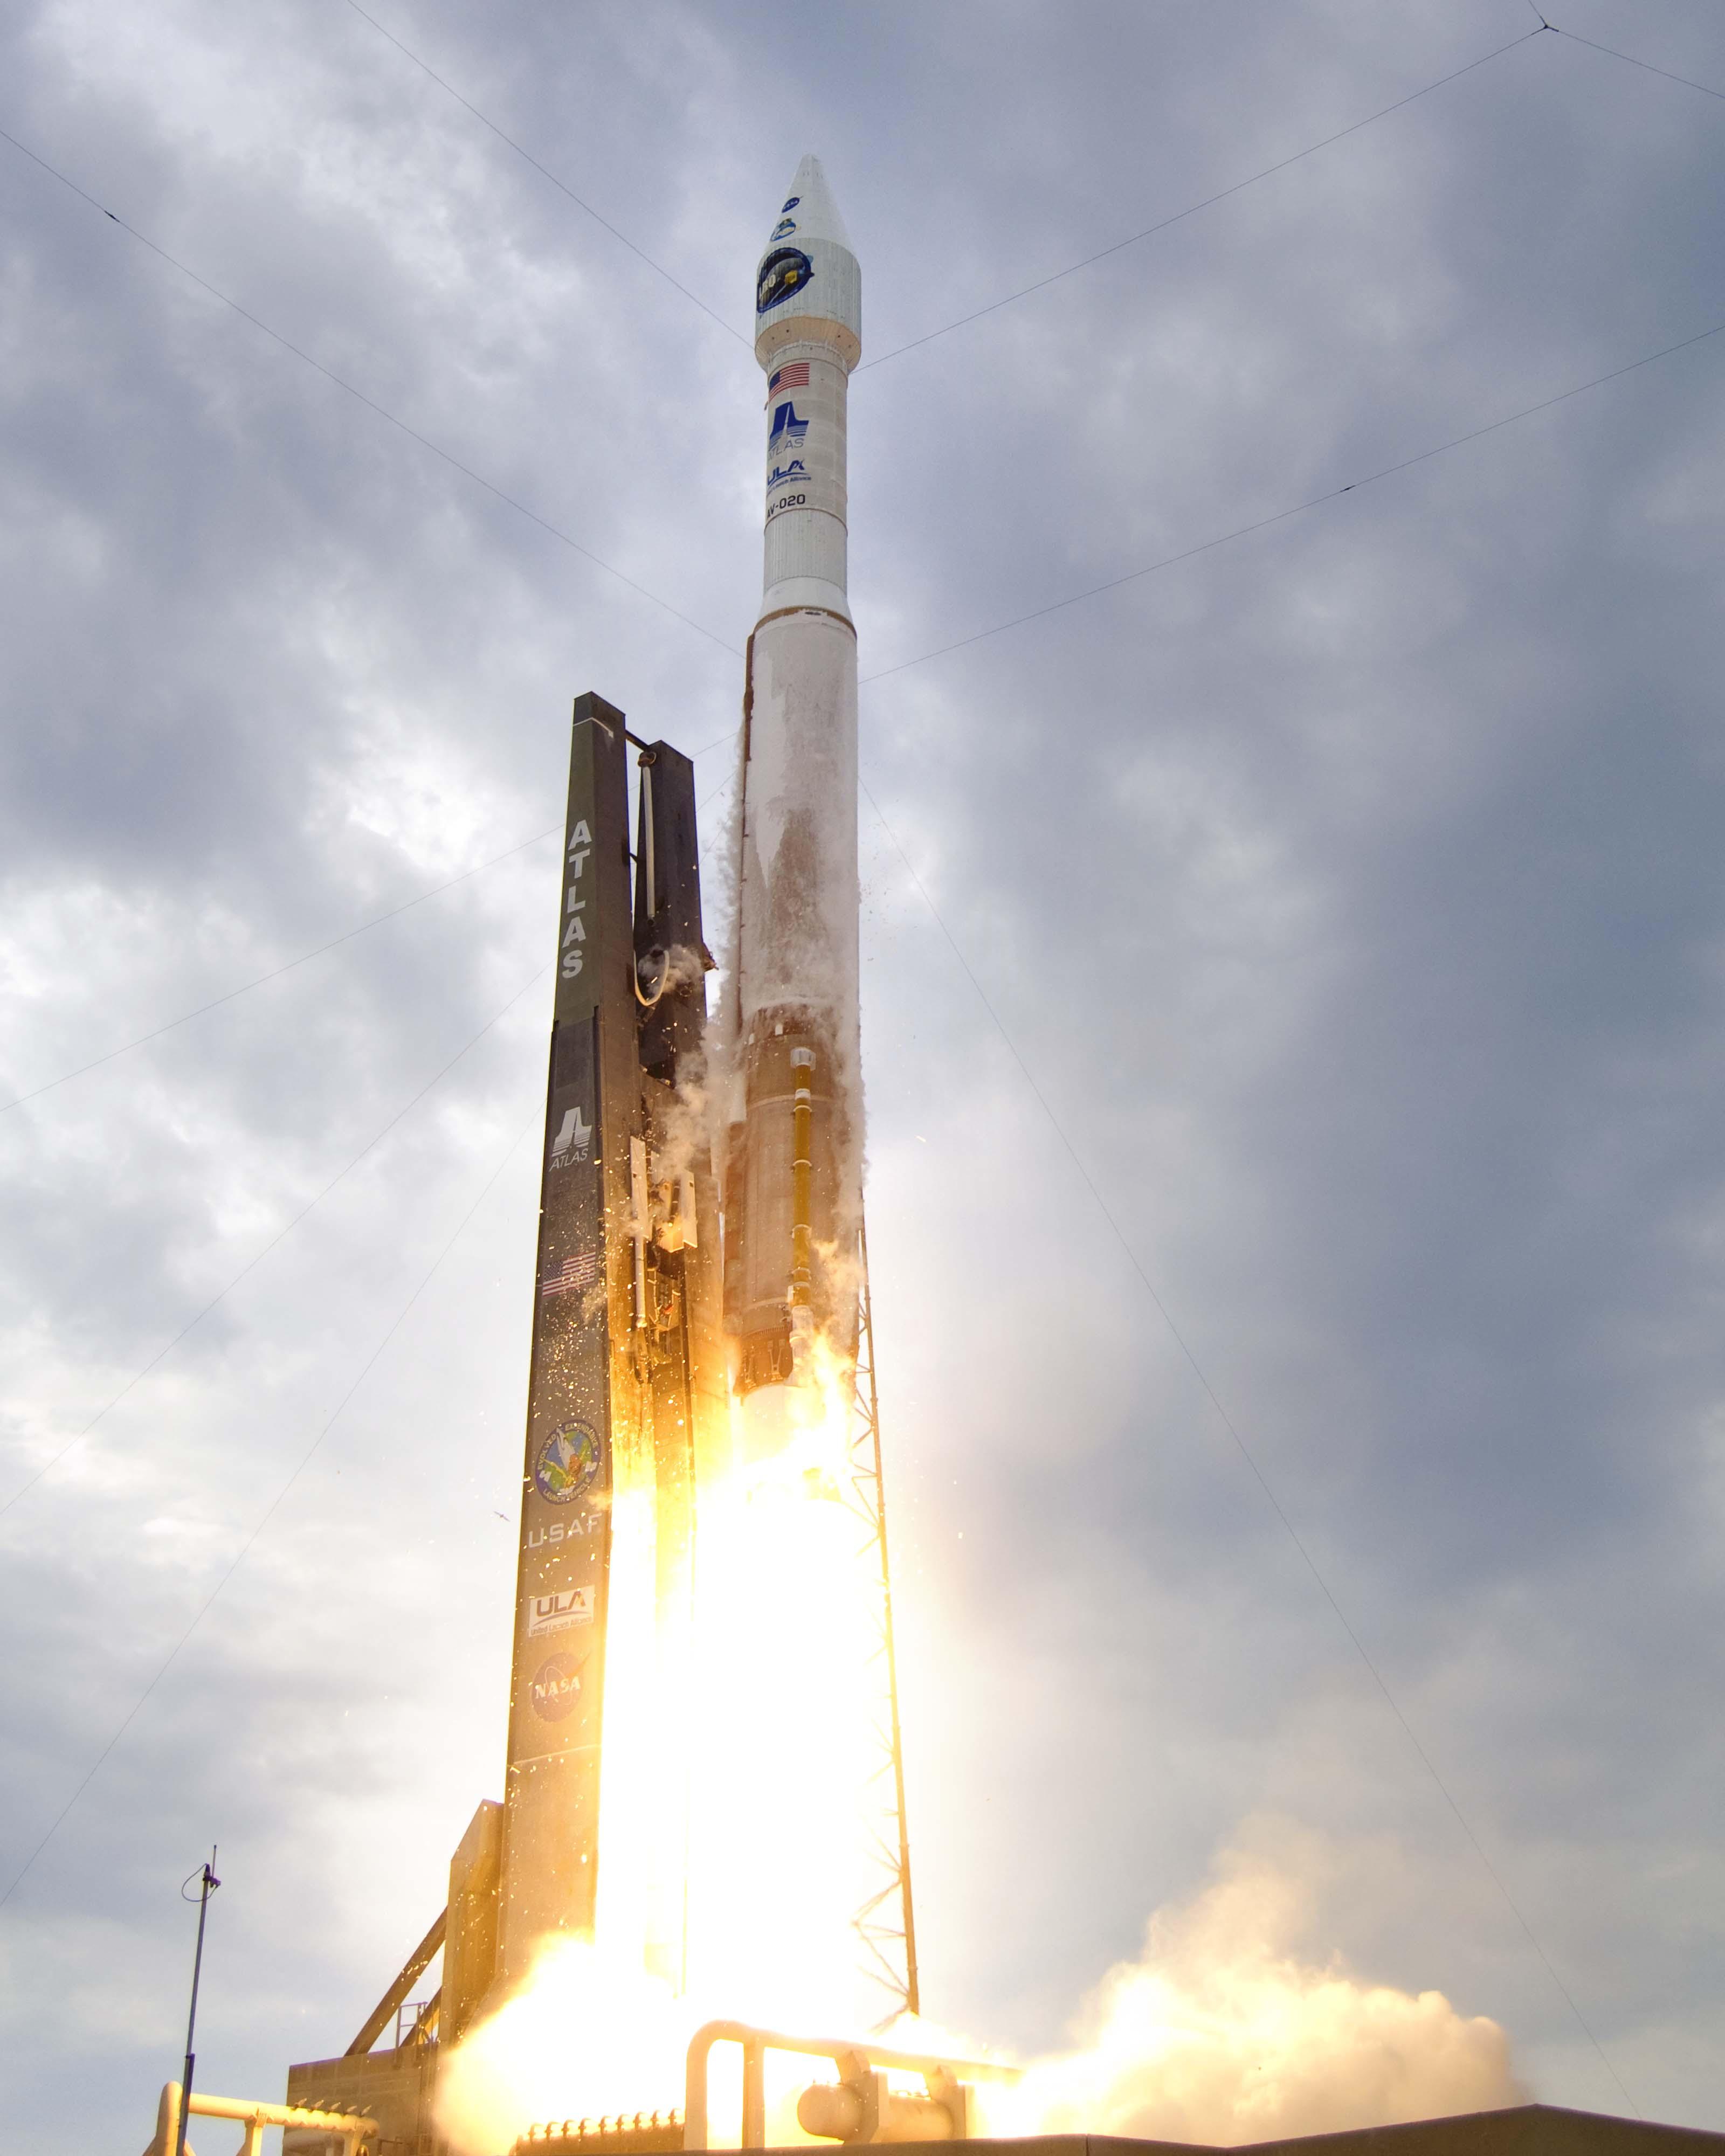 NASA’s Lunar Reconnaissance Orbiter and Lunar Crater Observation and Sensing Satellite leave the launch pad